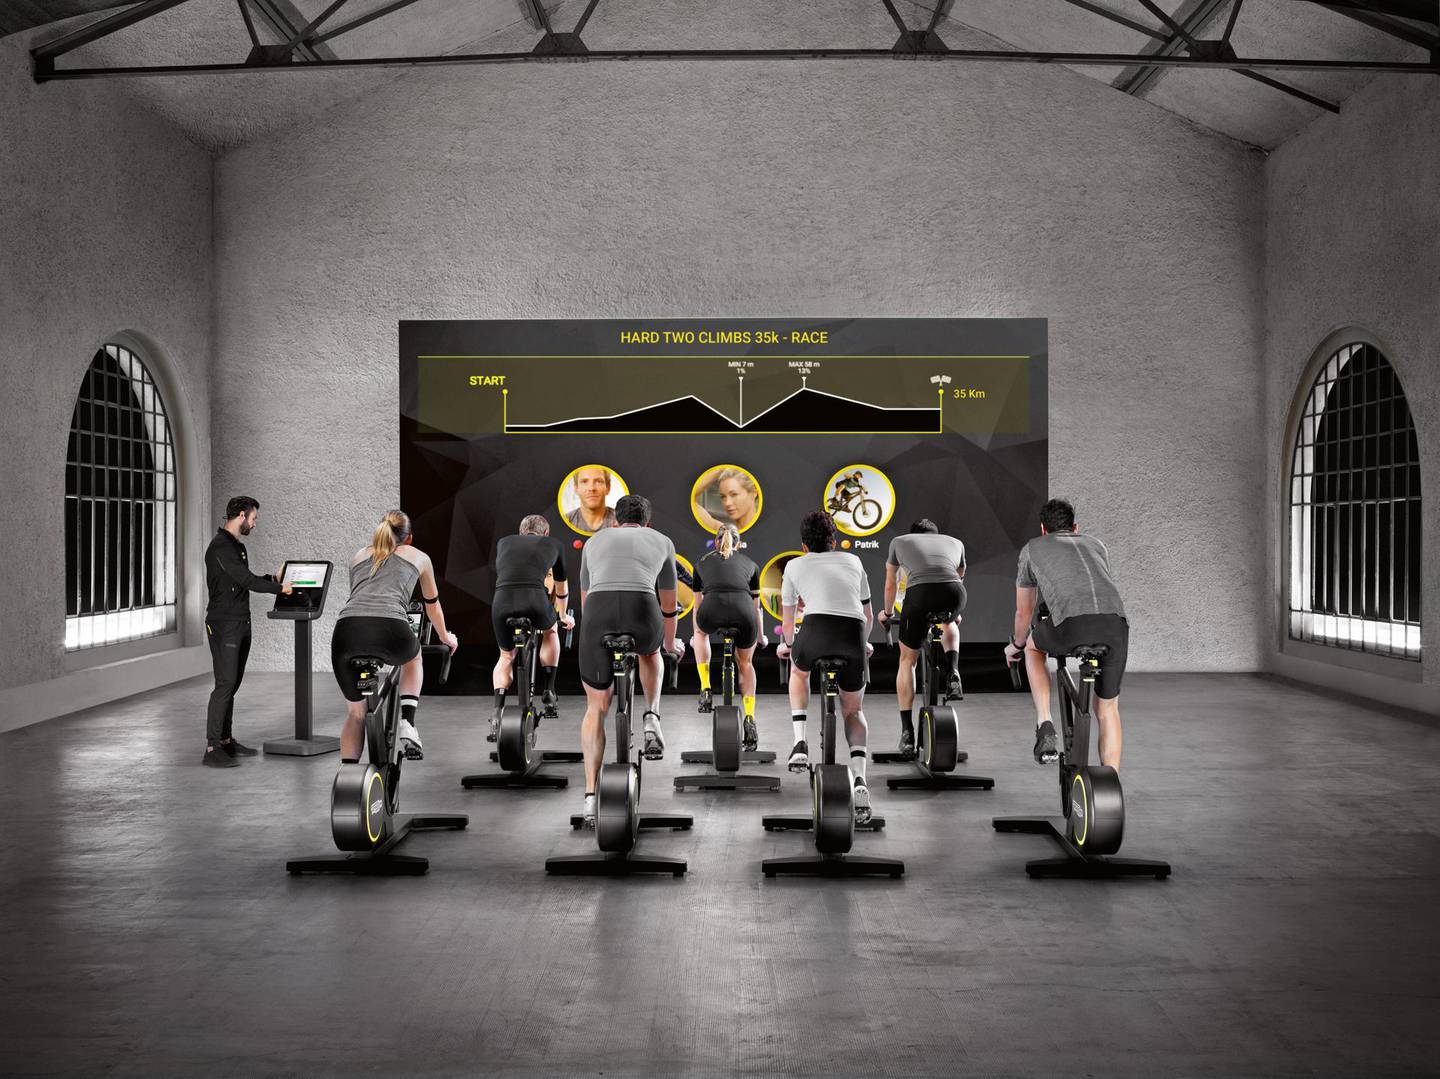 Technogym's SkillBike is the first stationary bike to be equipped with real gears, which allows users to replicate the dynamics of hill riding